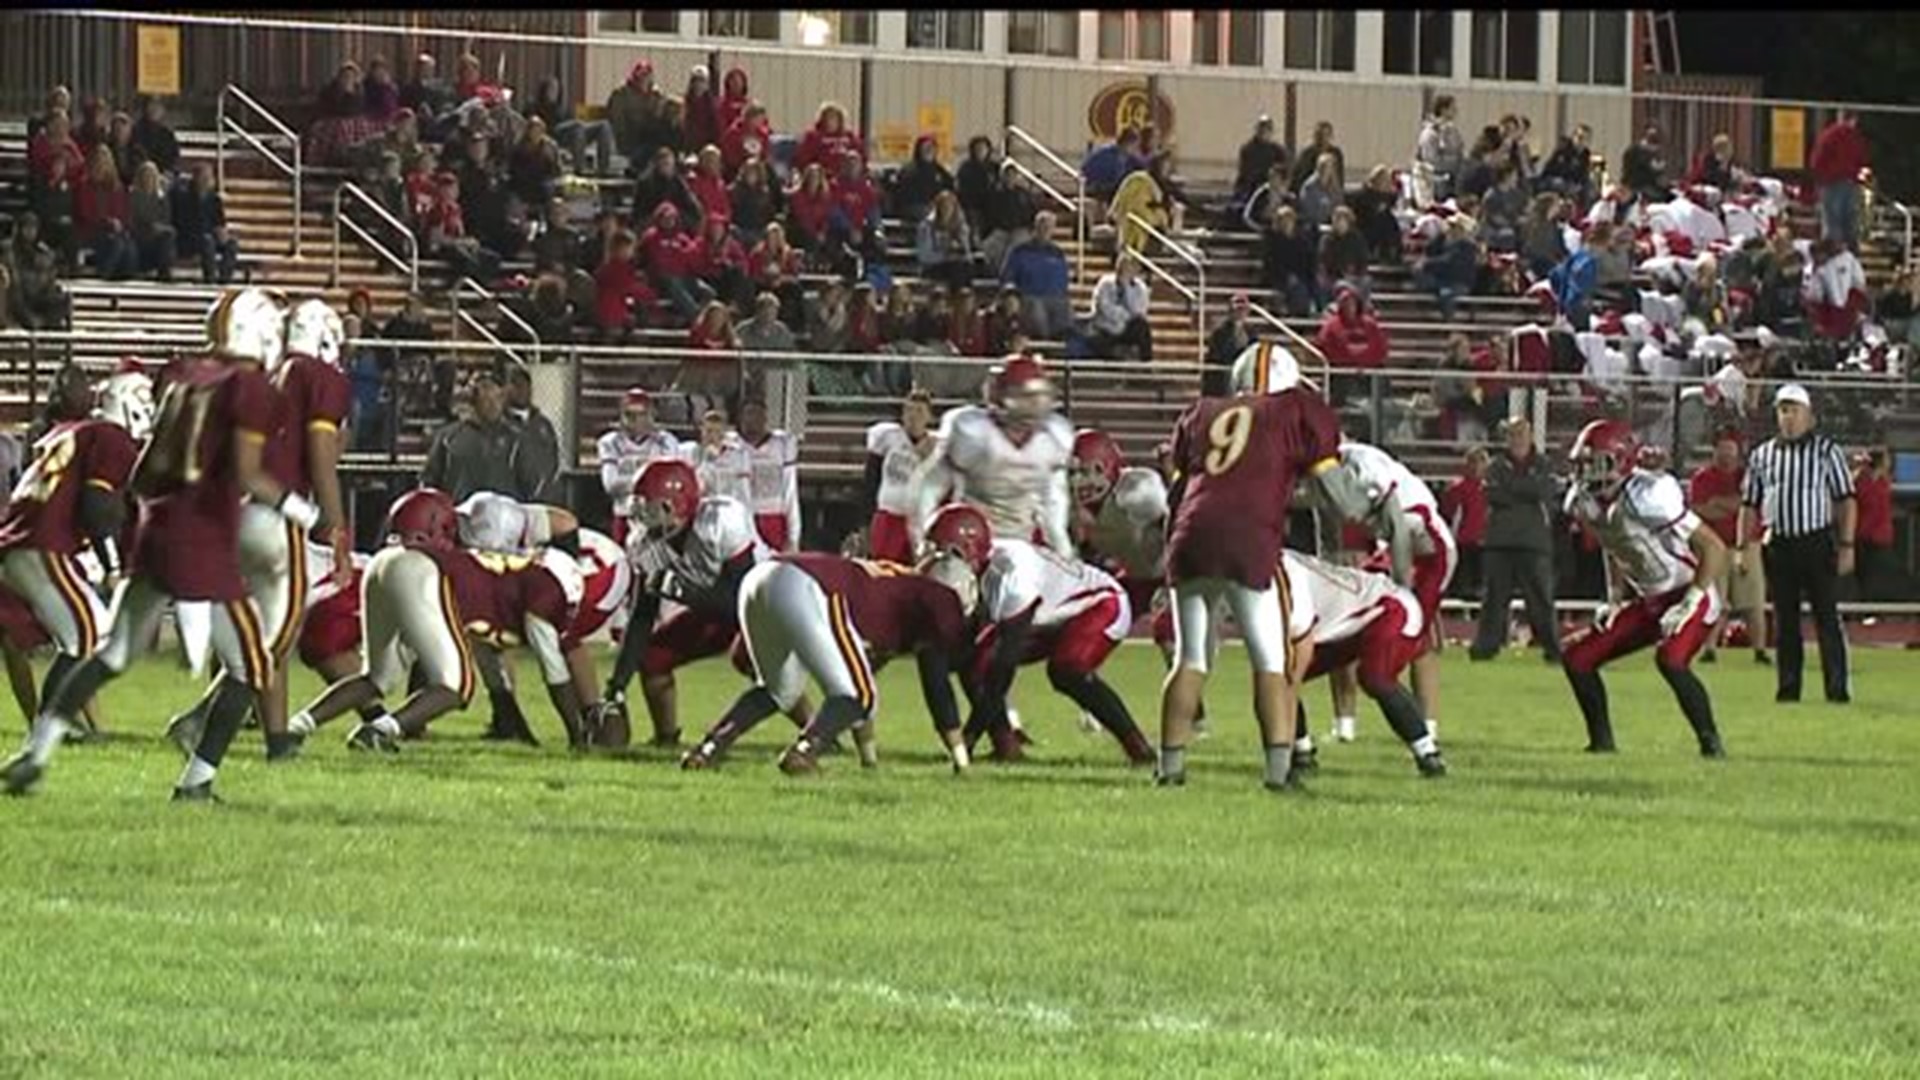 HSFF week 5 Pequea Valley at Columbia highlights